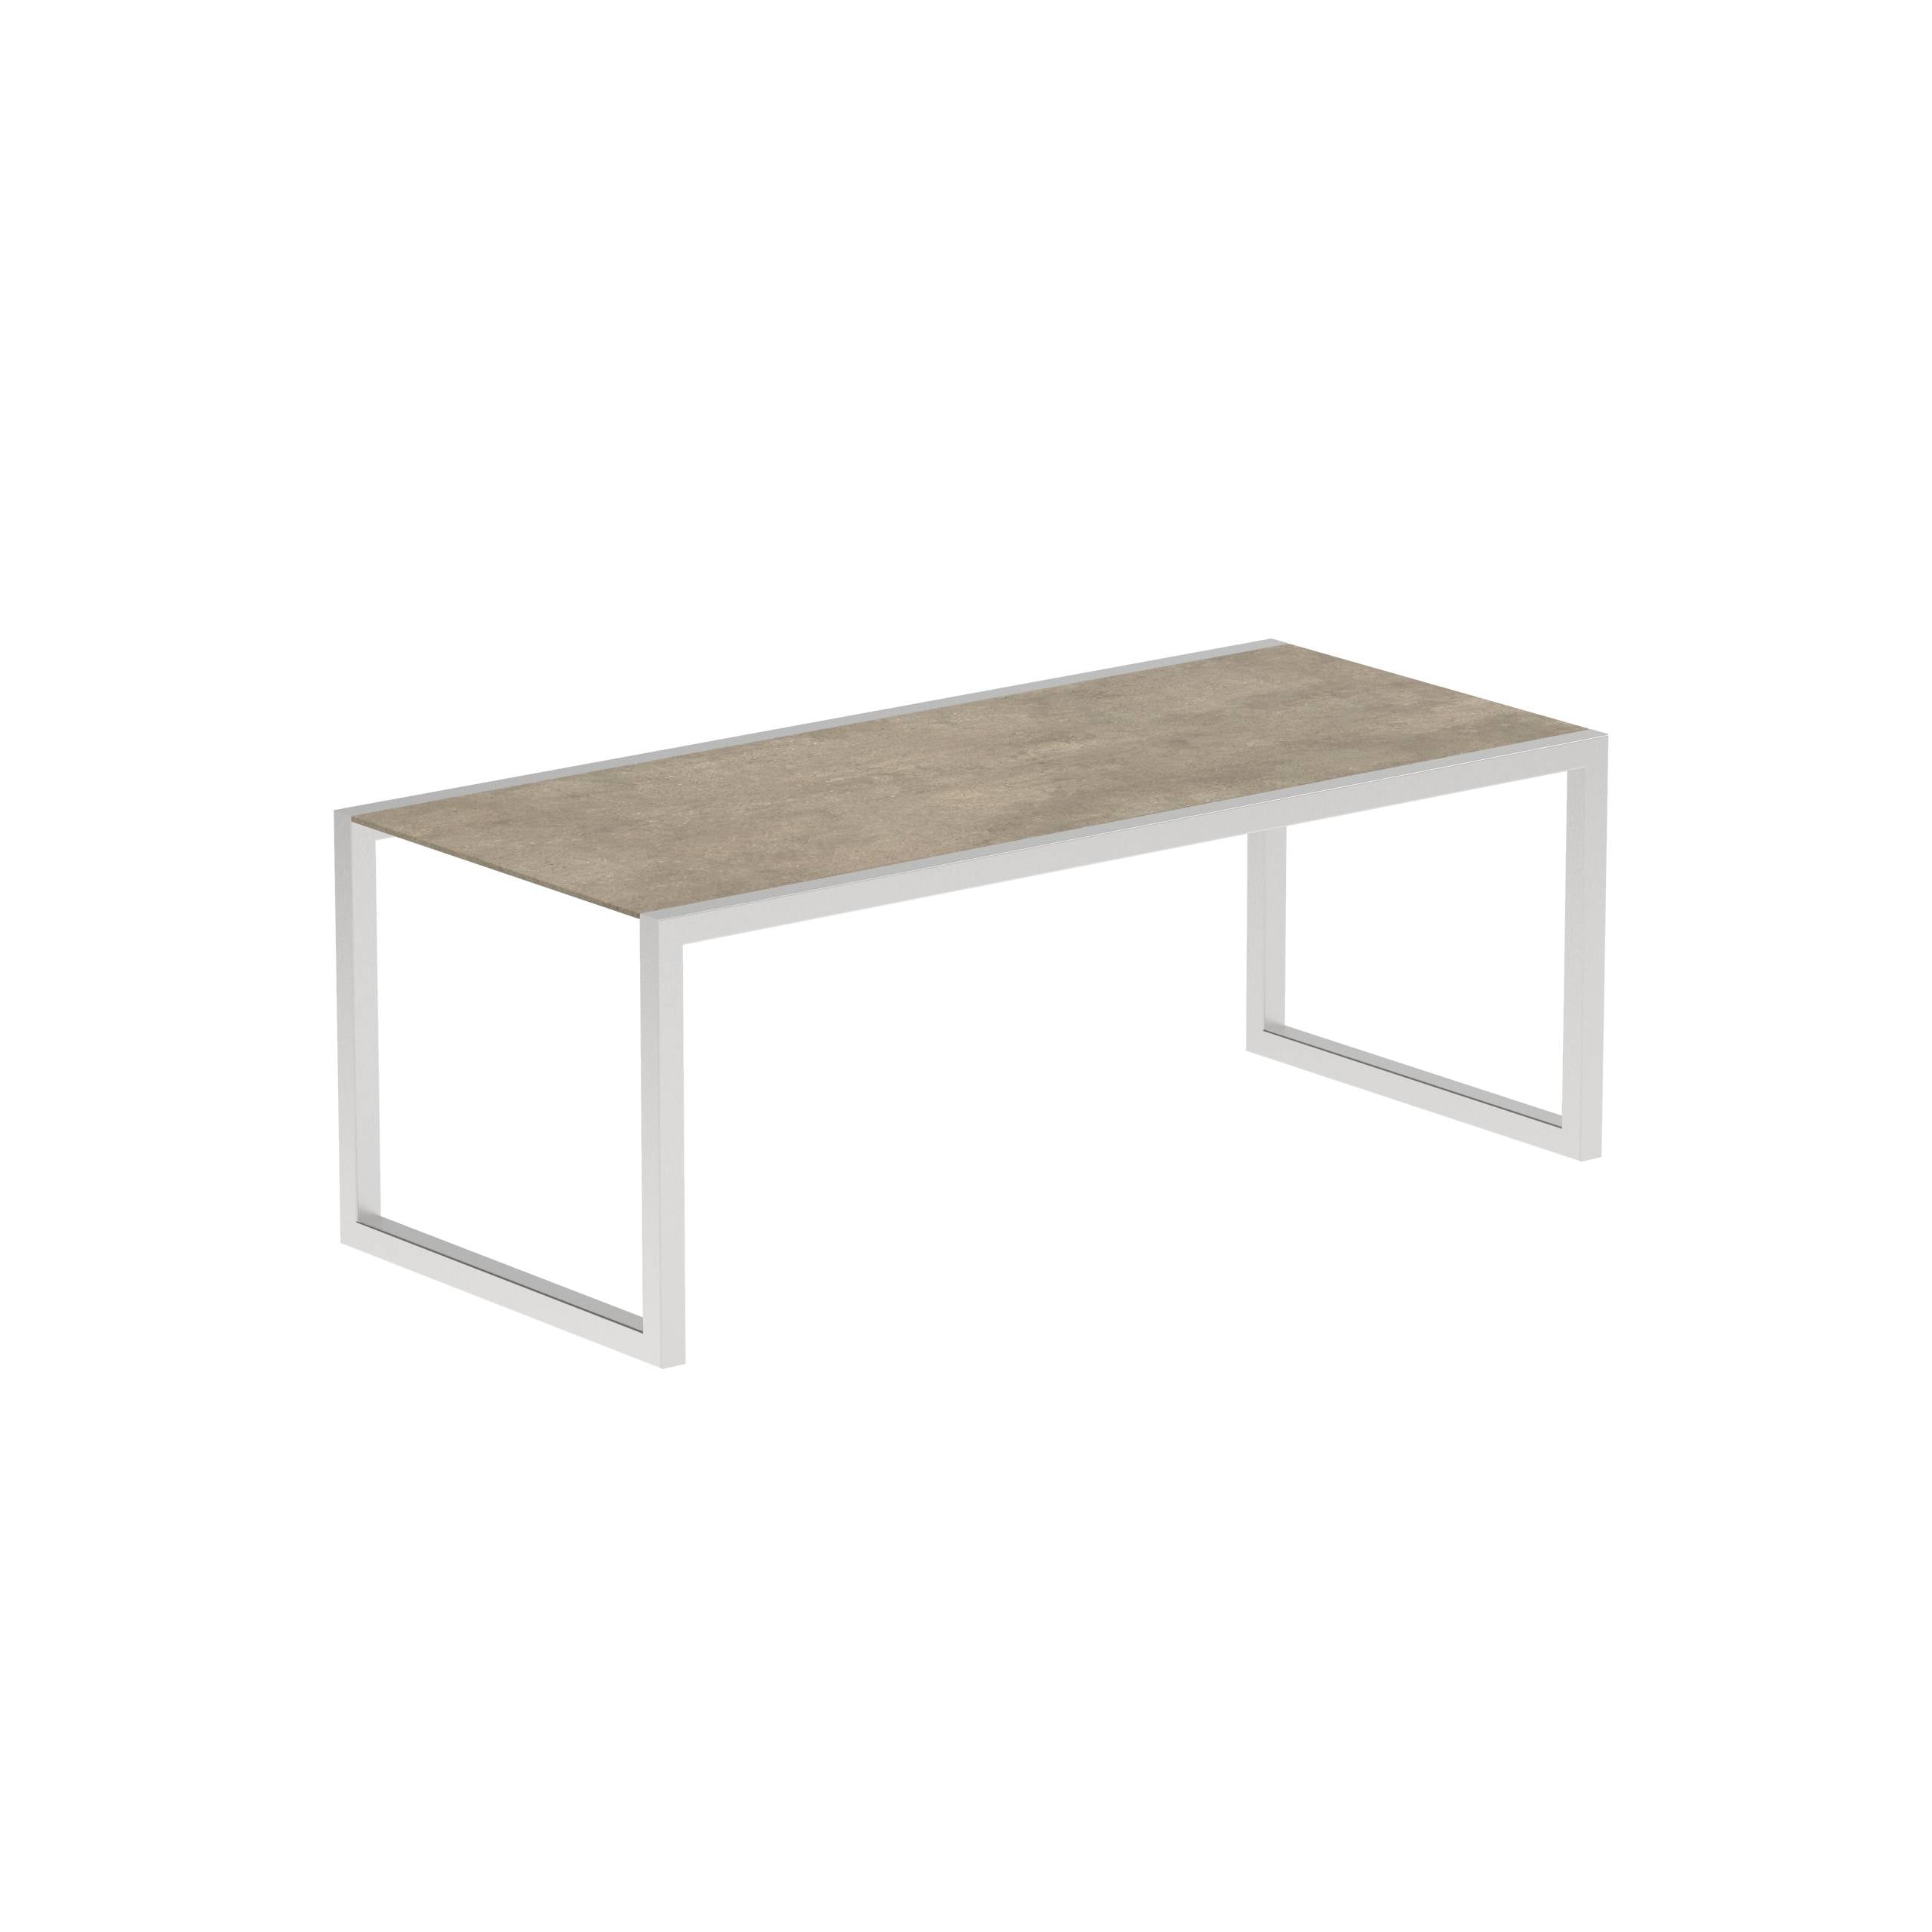 Ninix Table 200x90cm With Stainless Steel And Ceramic Terra Sabbia